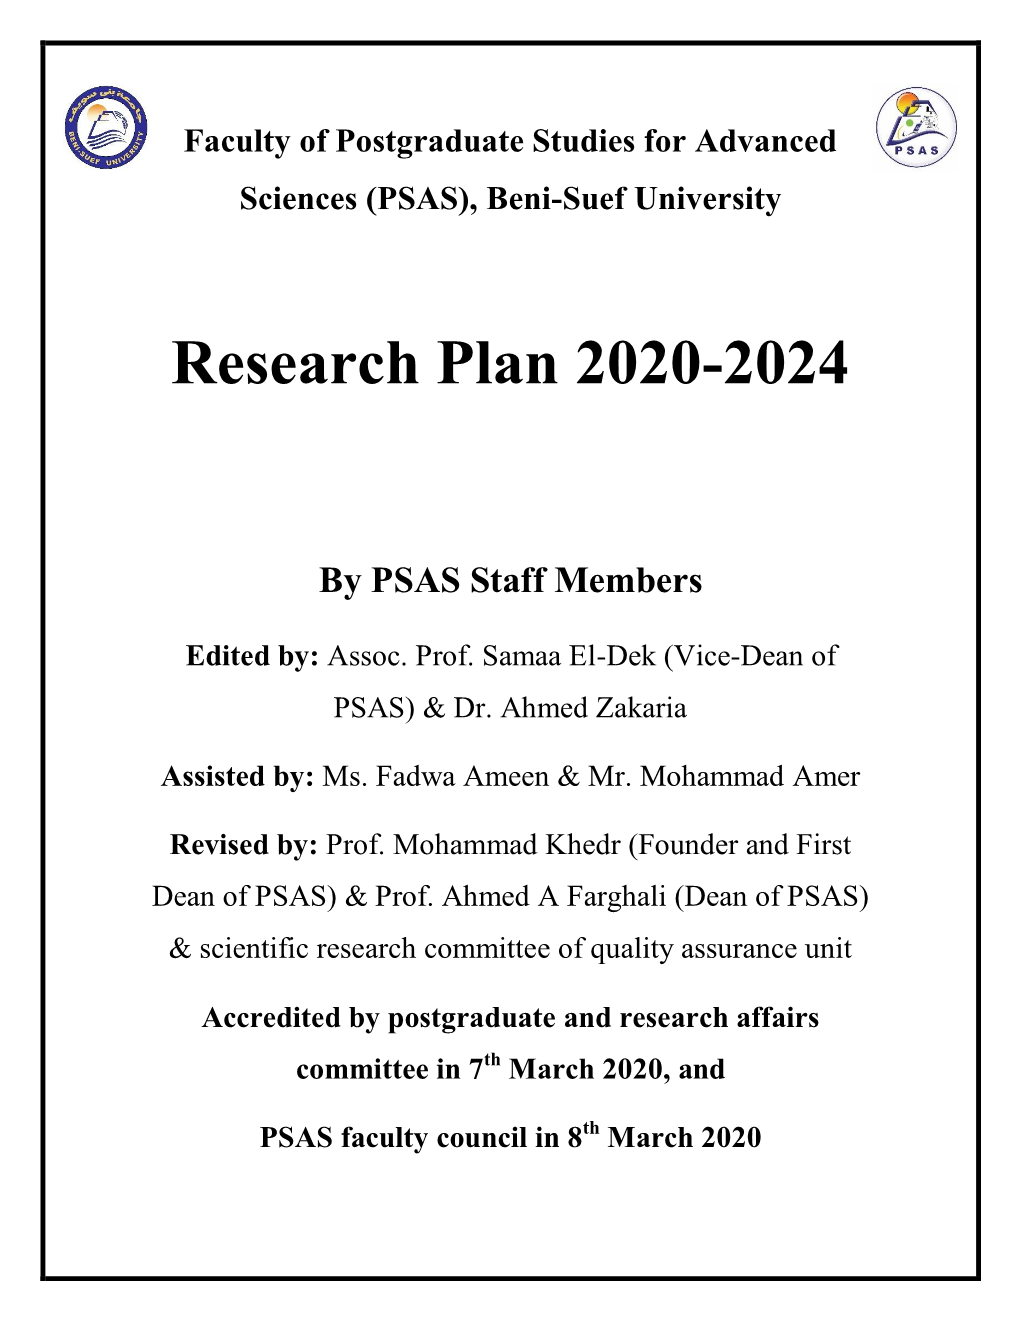 Beni-Suef University Research Plan 2020-2024 by PSAS Staff Members Edited By